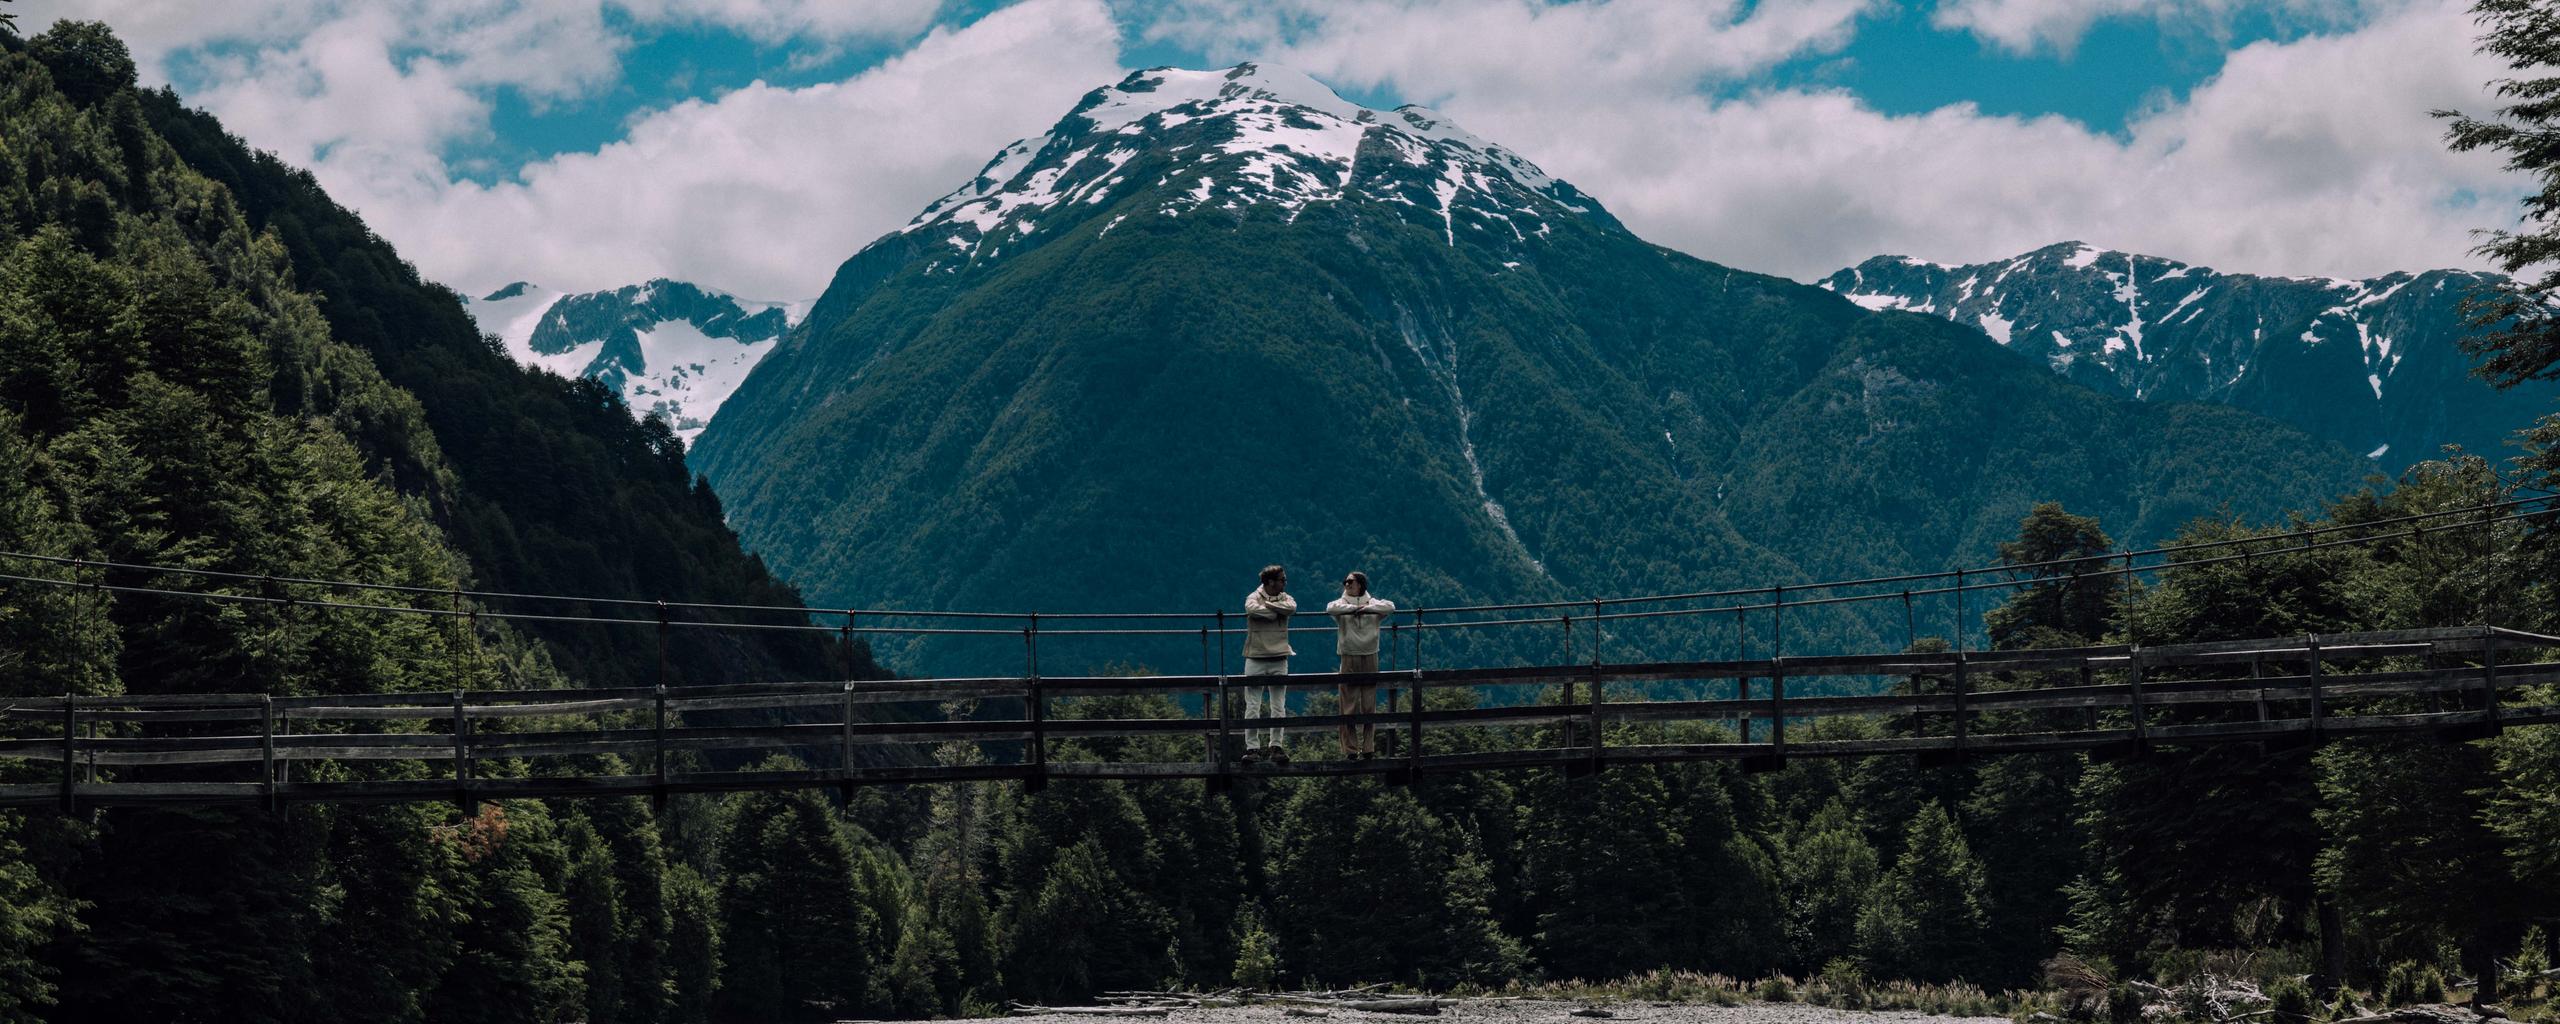 Man and woman standing on wood bridge with mountains of Patagonia in background